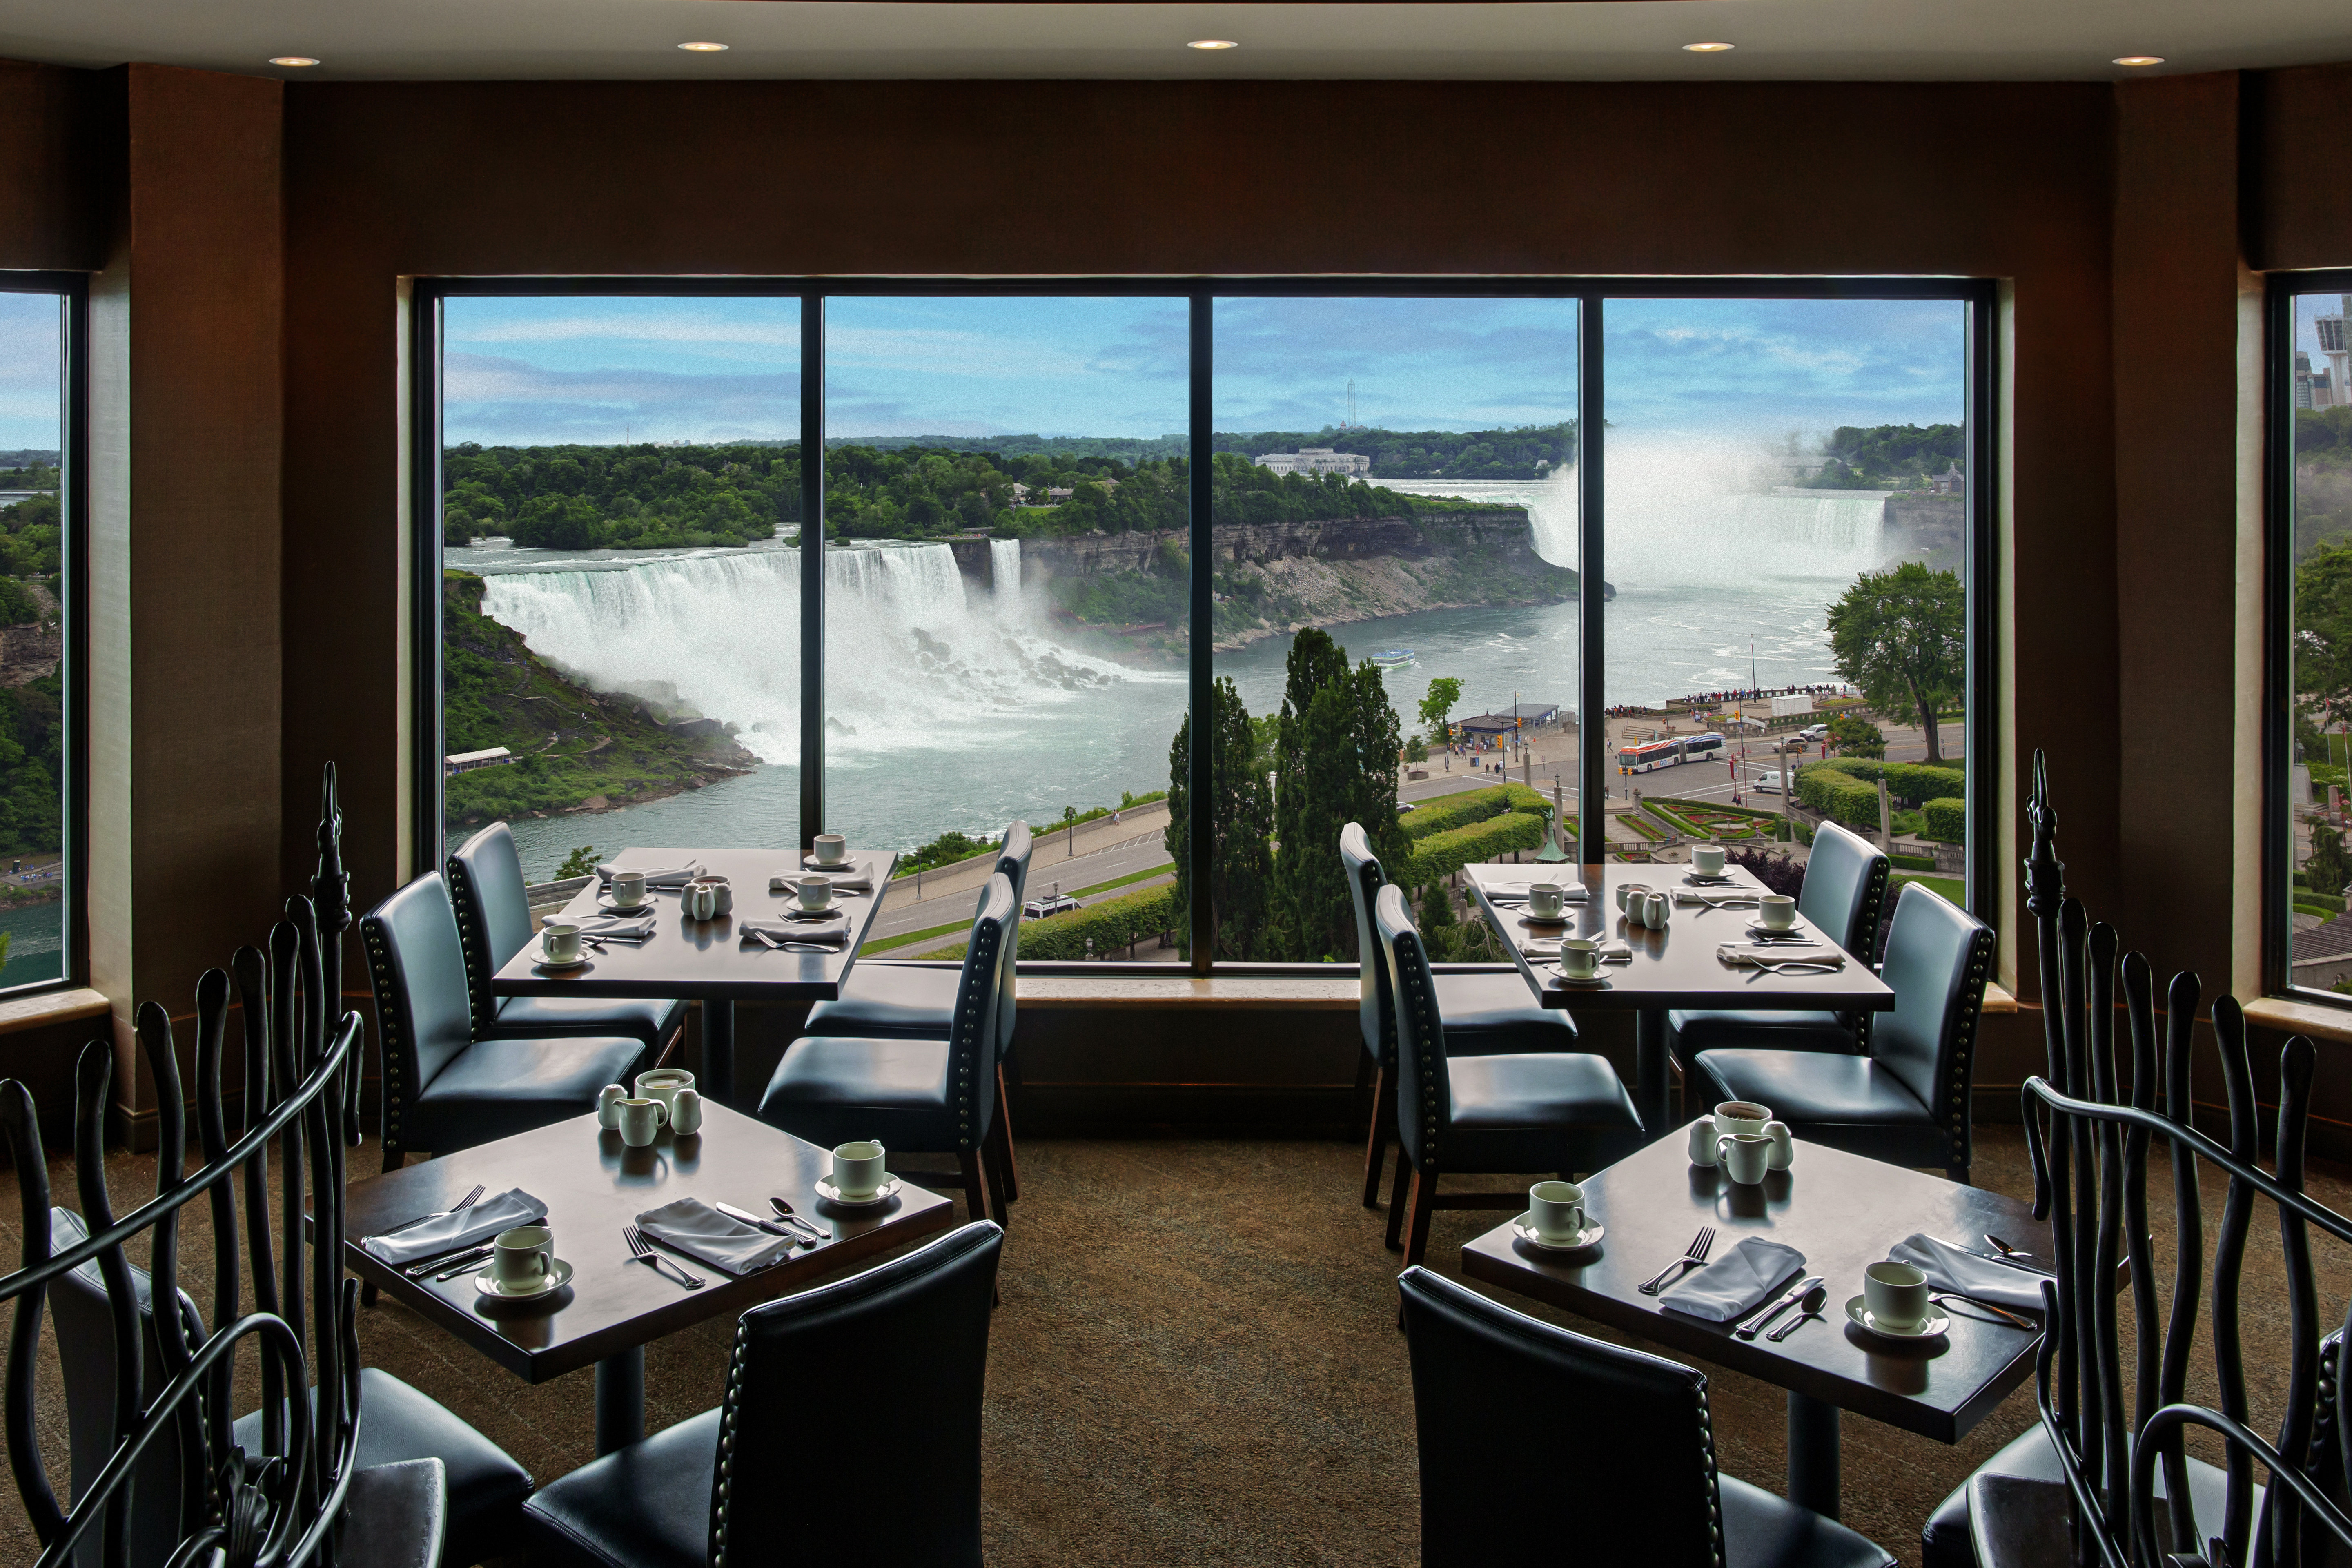 Enjoy a Fallsview breakfast in our Rainbow Room dining room